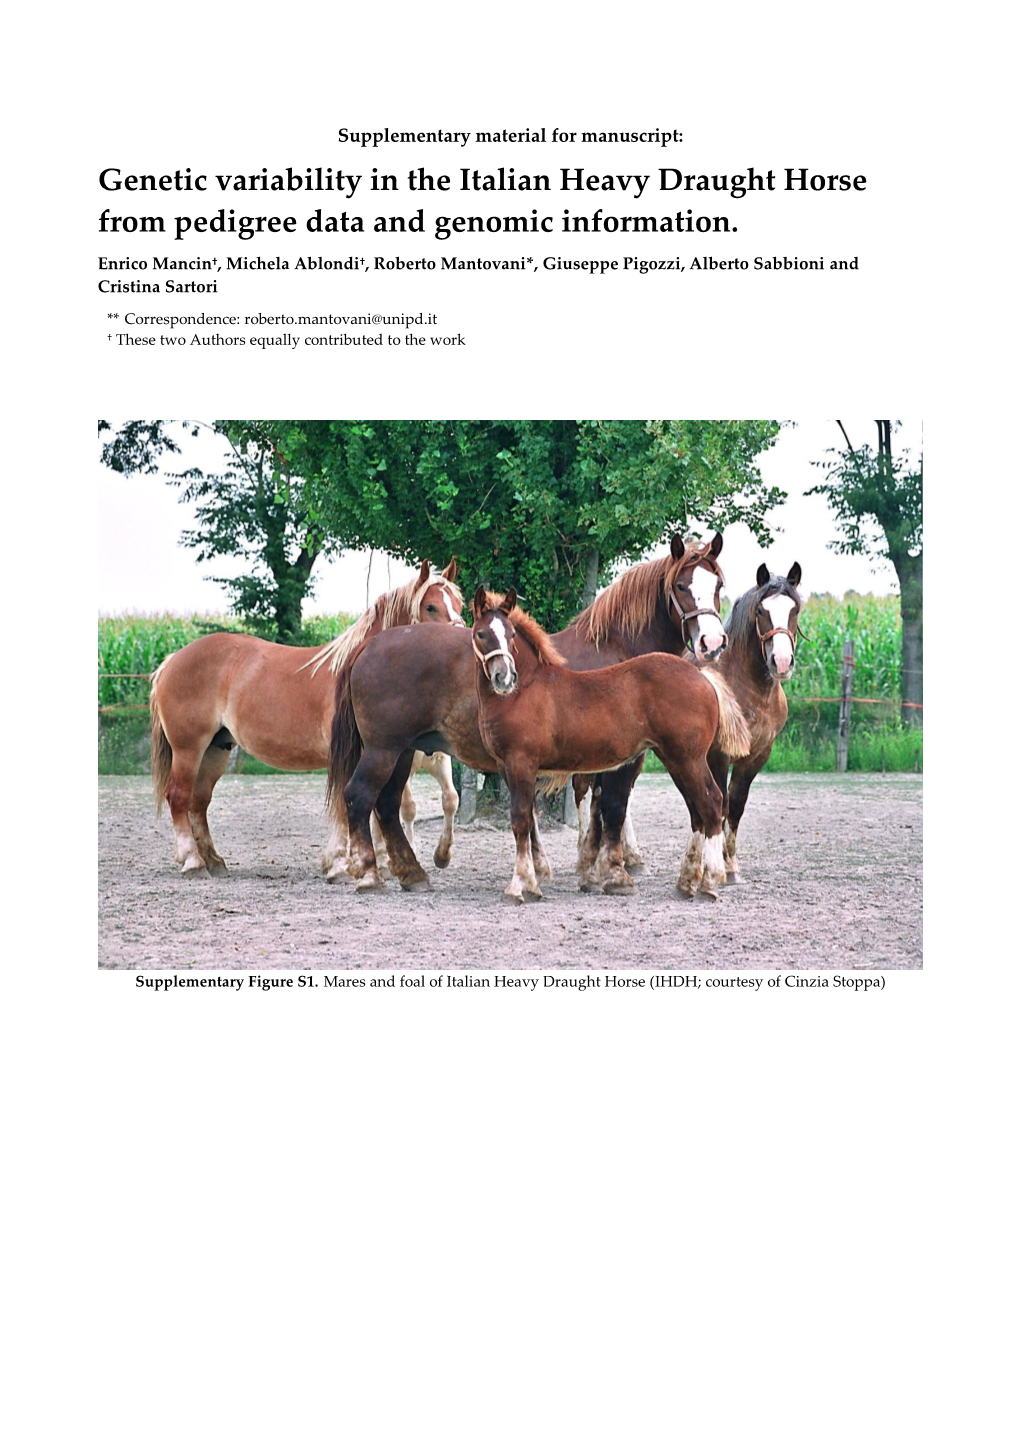 Genetic Variability in the Italian Heavy Draught Horse from Pedigree Data and Genomic Information